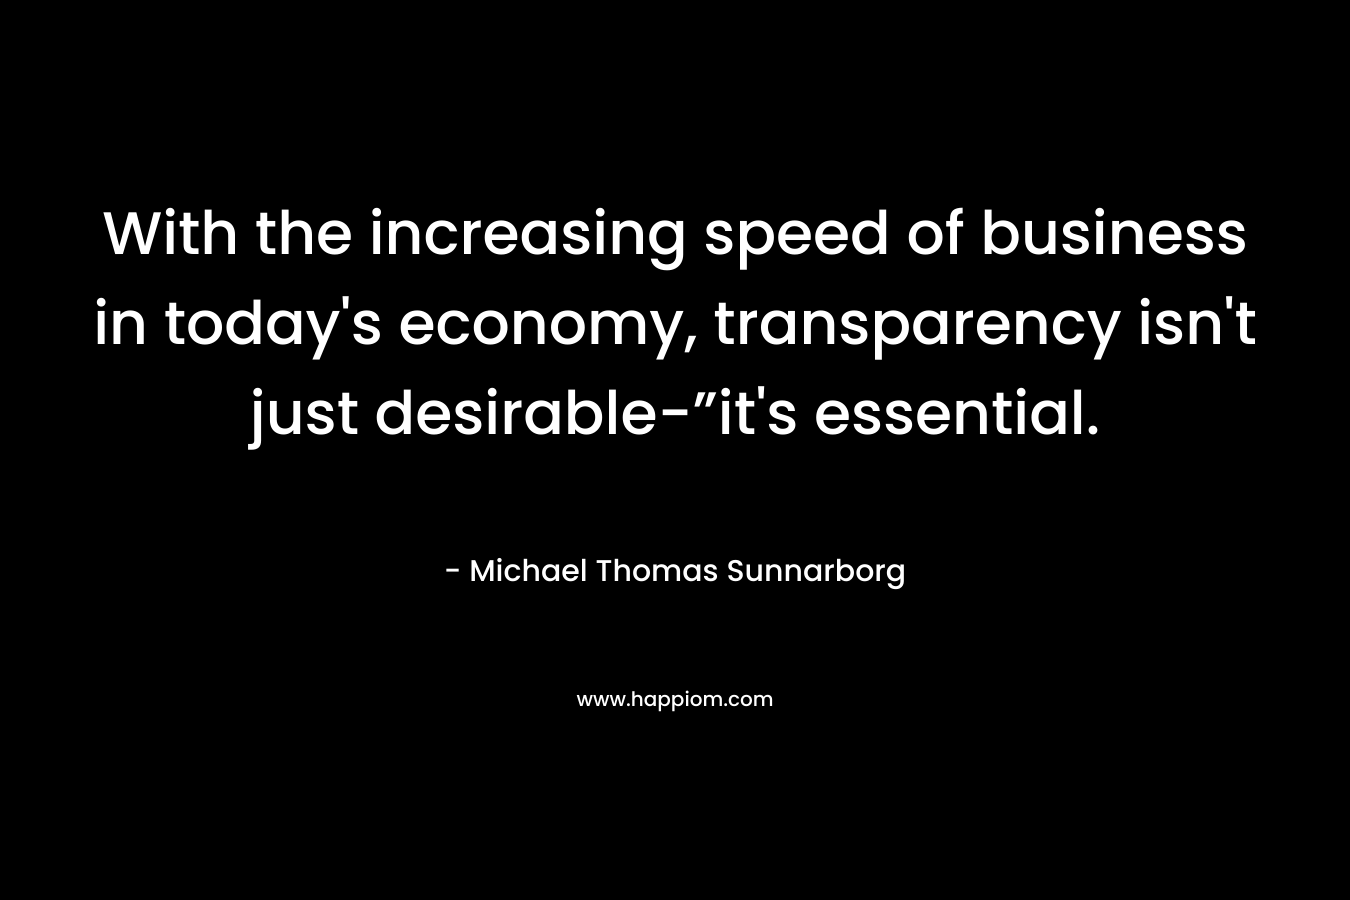 With the increasing speed of business in today's economy, transparency isn't just desirable-”it's essential.